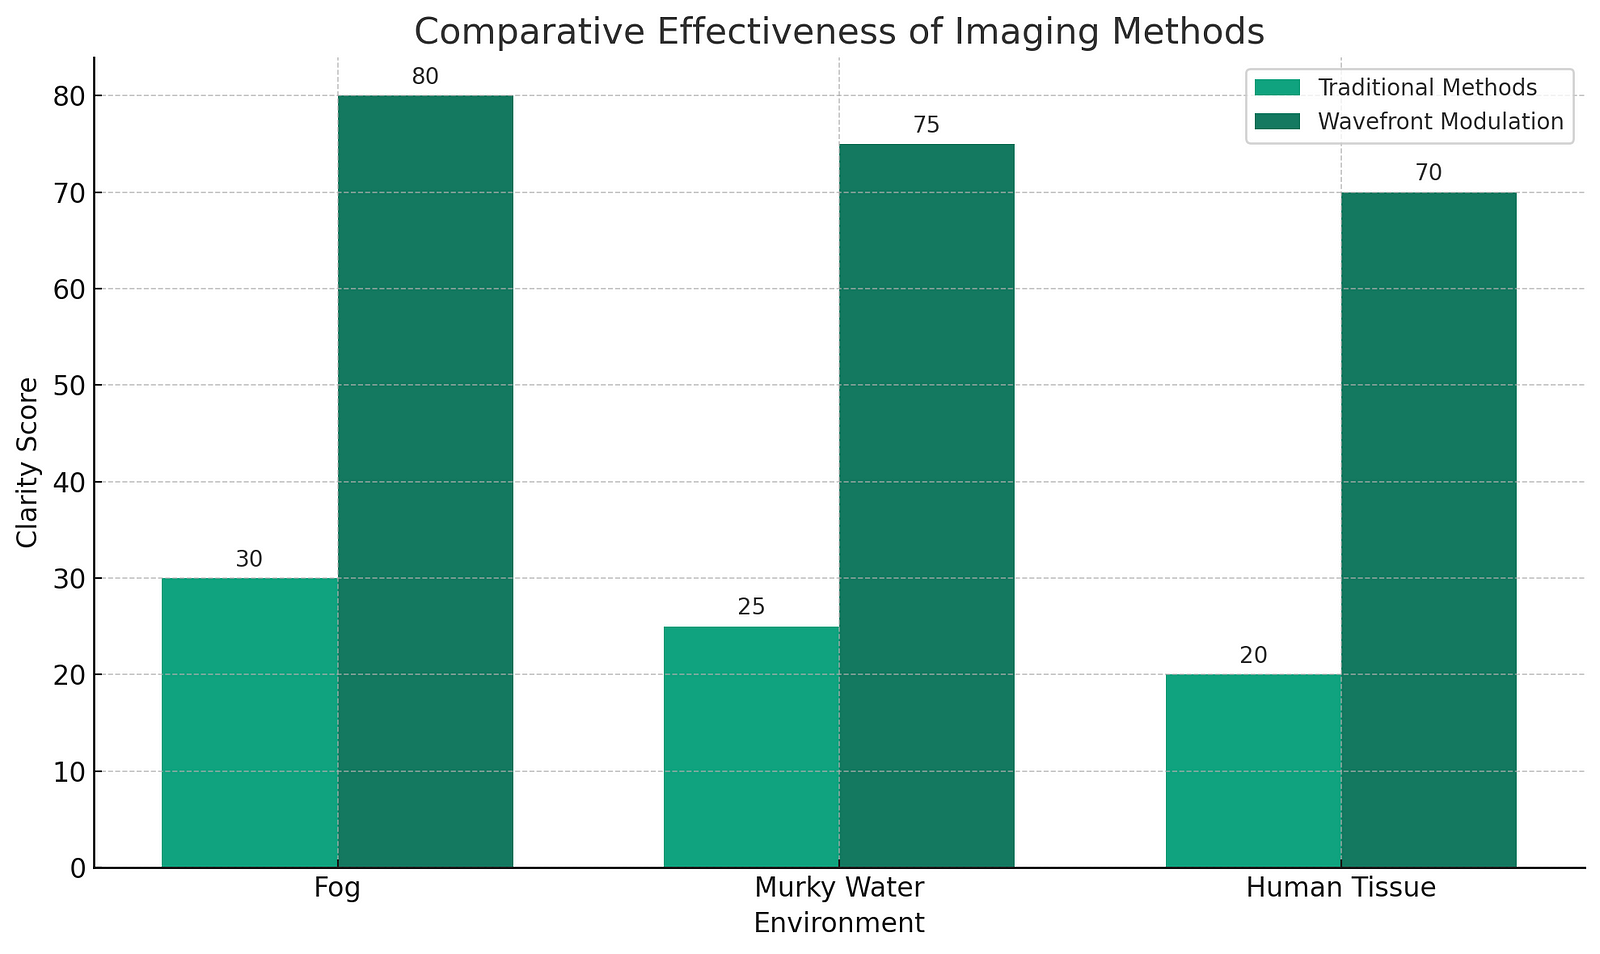 A bar graph comparing clarity scores between traditional imaging methods and wavefront modulation across three environments: fog, murky water, and human tissues. Wavefront modulation consistently shows higher clarity scores in all conditions.